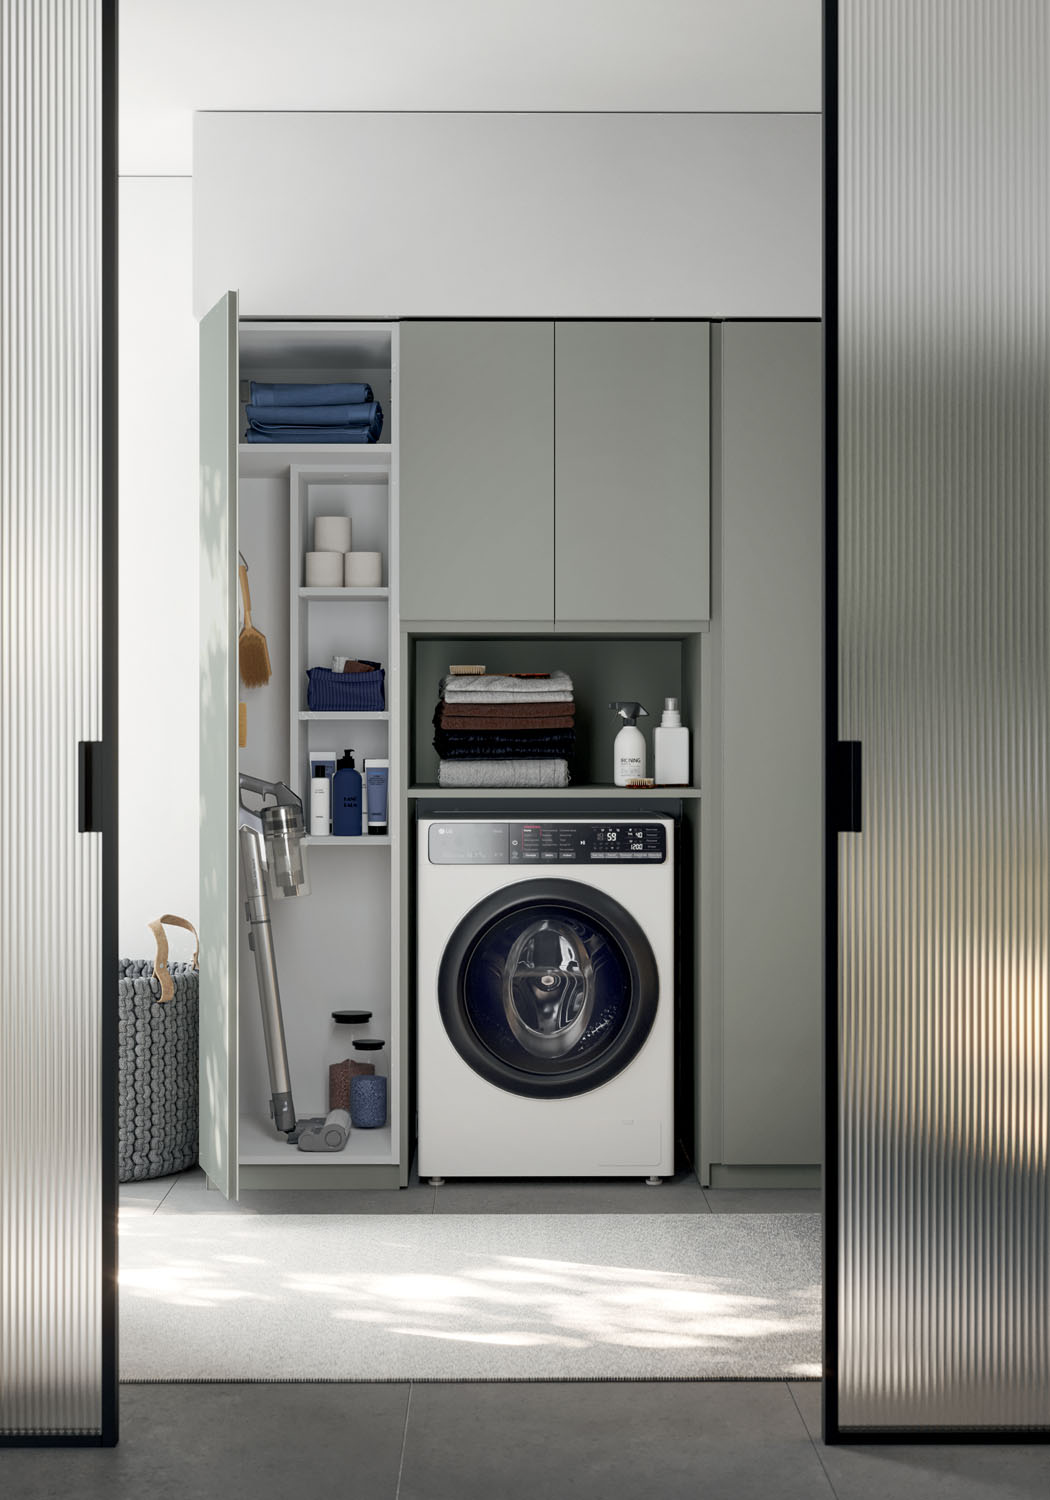 Spazio Time: laundry room furniture solutions - Ideagroup